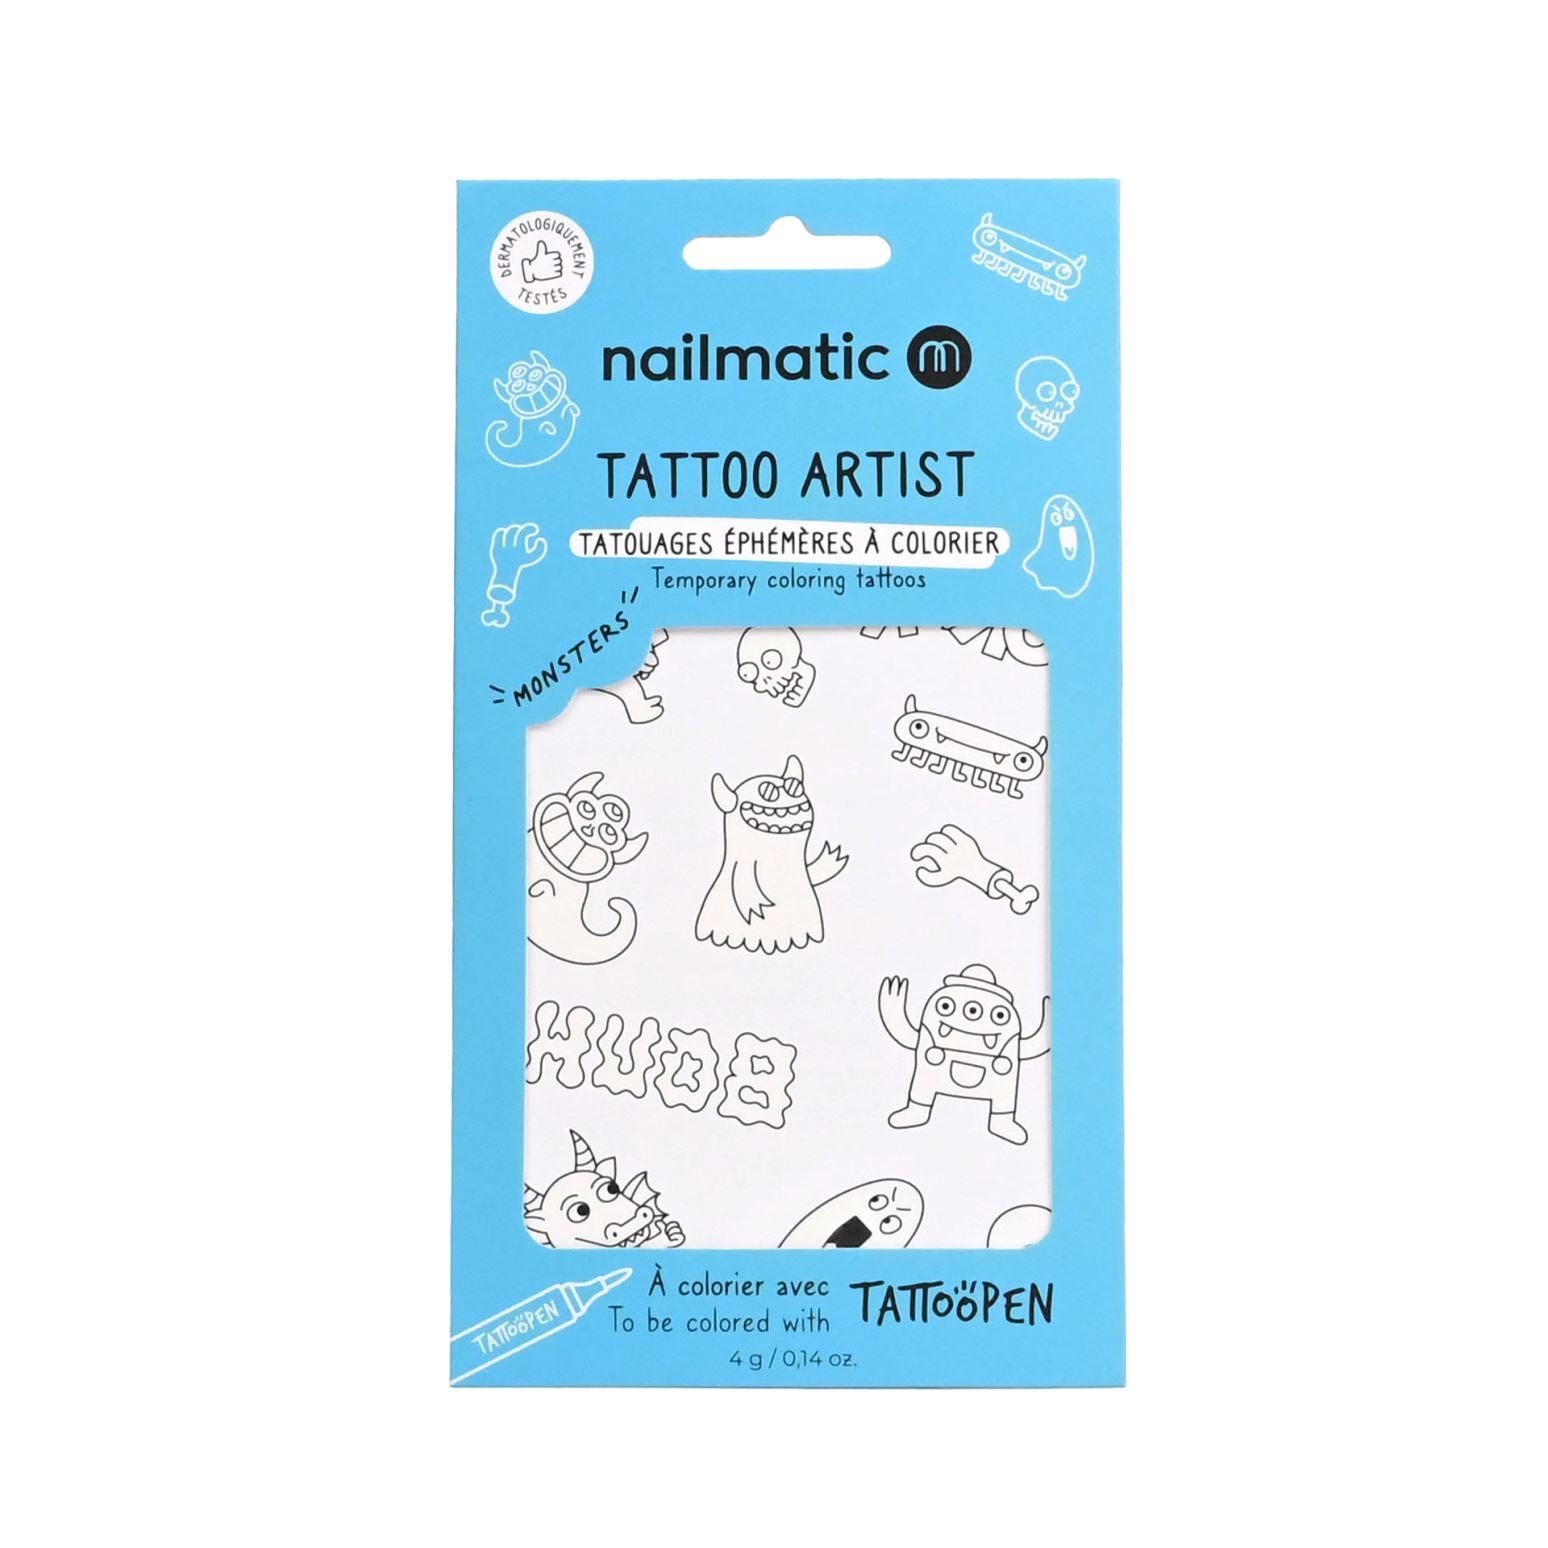 12 tatouages a colorier monsters - Nailmatic 150TMONSTERS 3760229899430